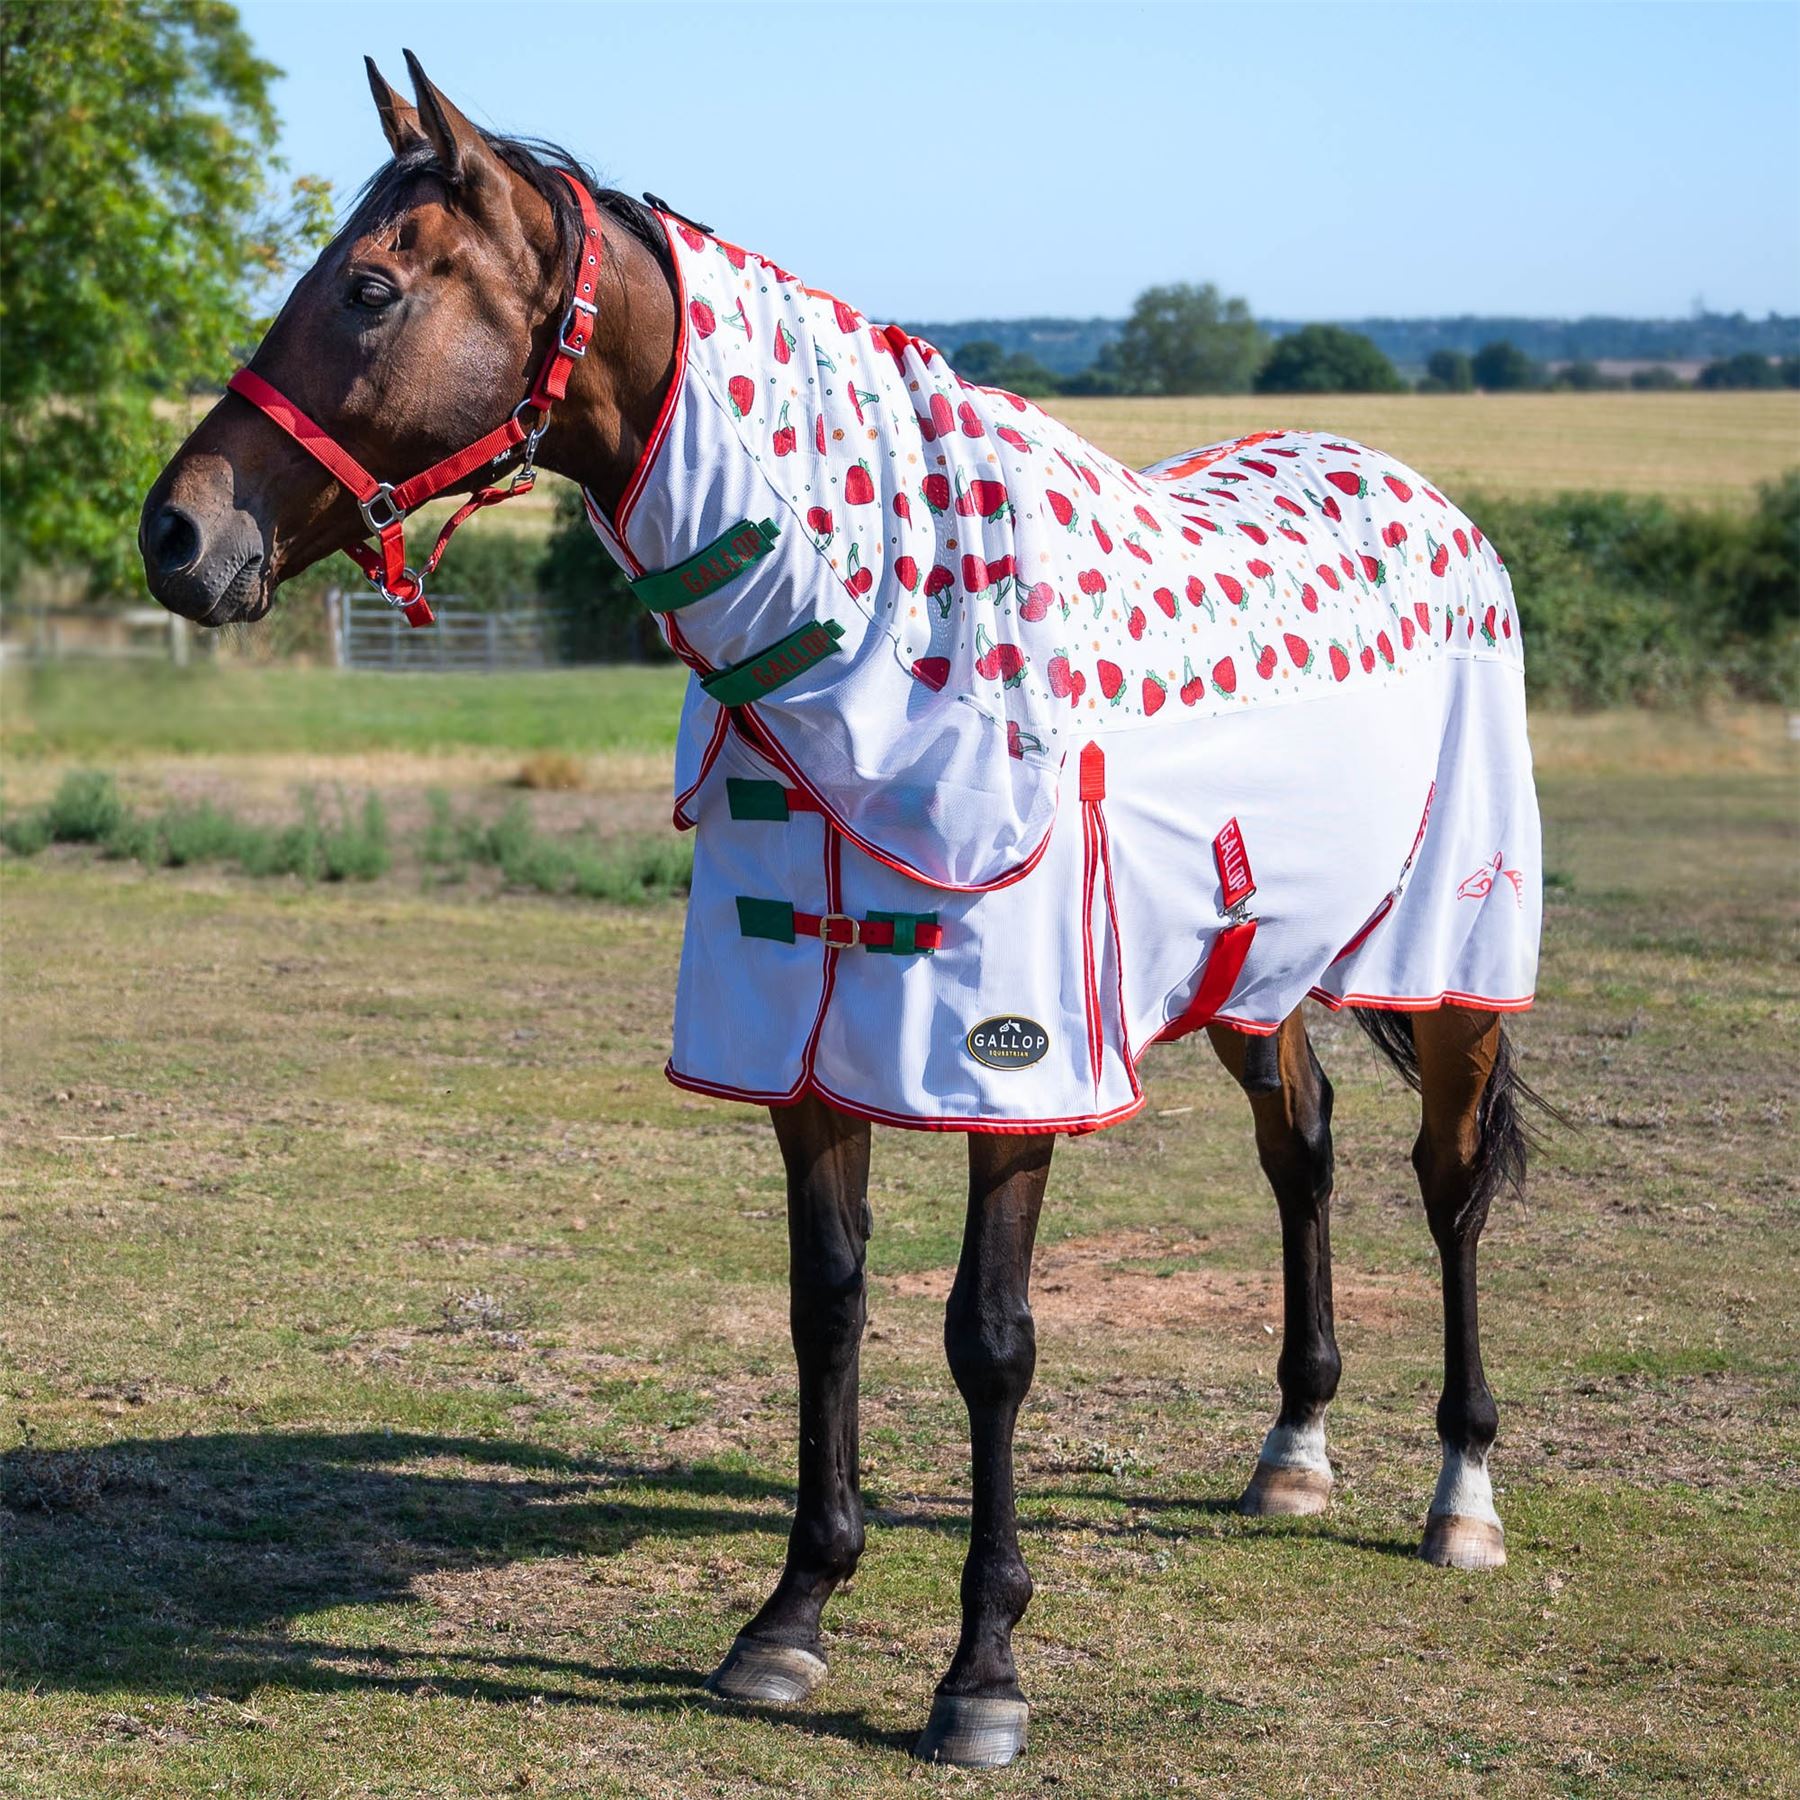 Gallop Equestrian Berries & Cherries Combo Fly Rug - Just Horse Riders